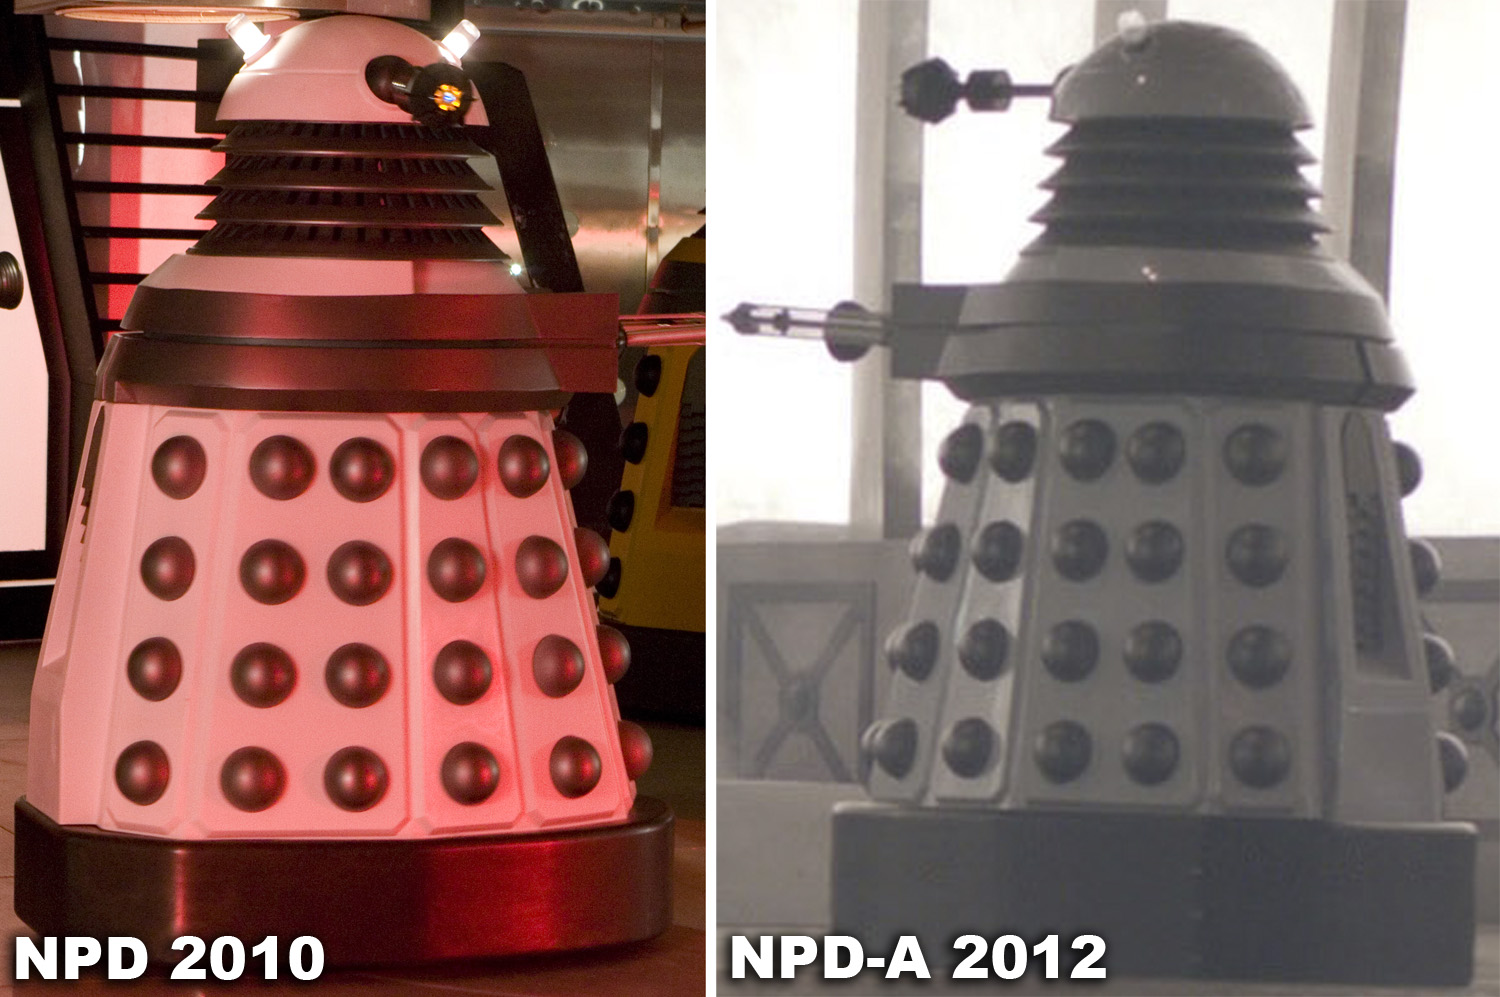 Comparison of the rear of the original NPD and the new NPD-A